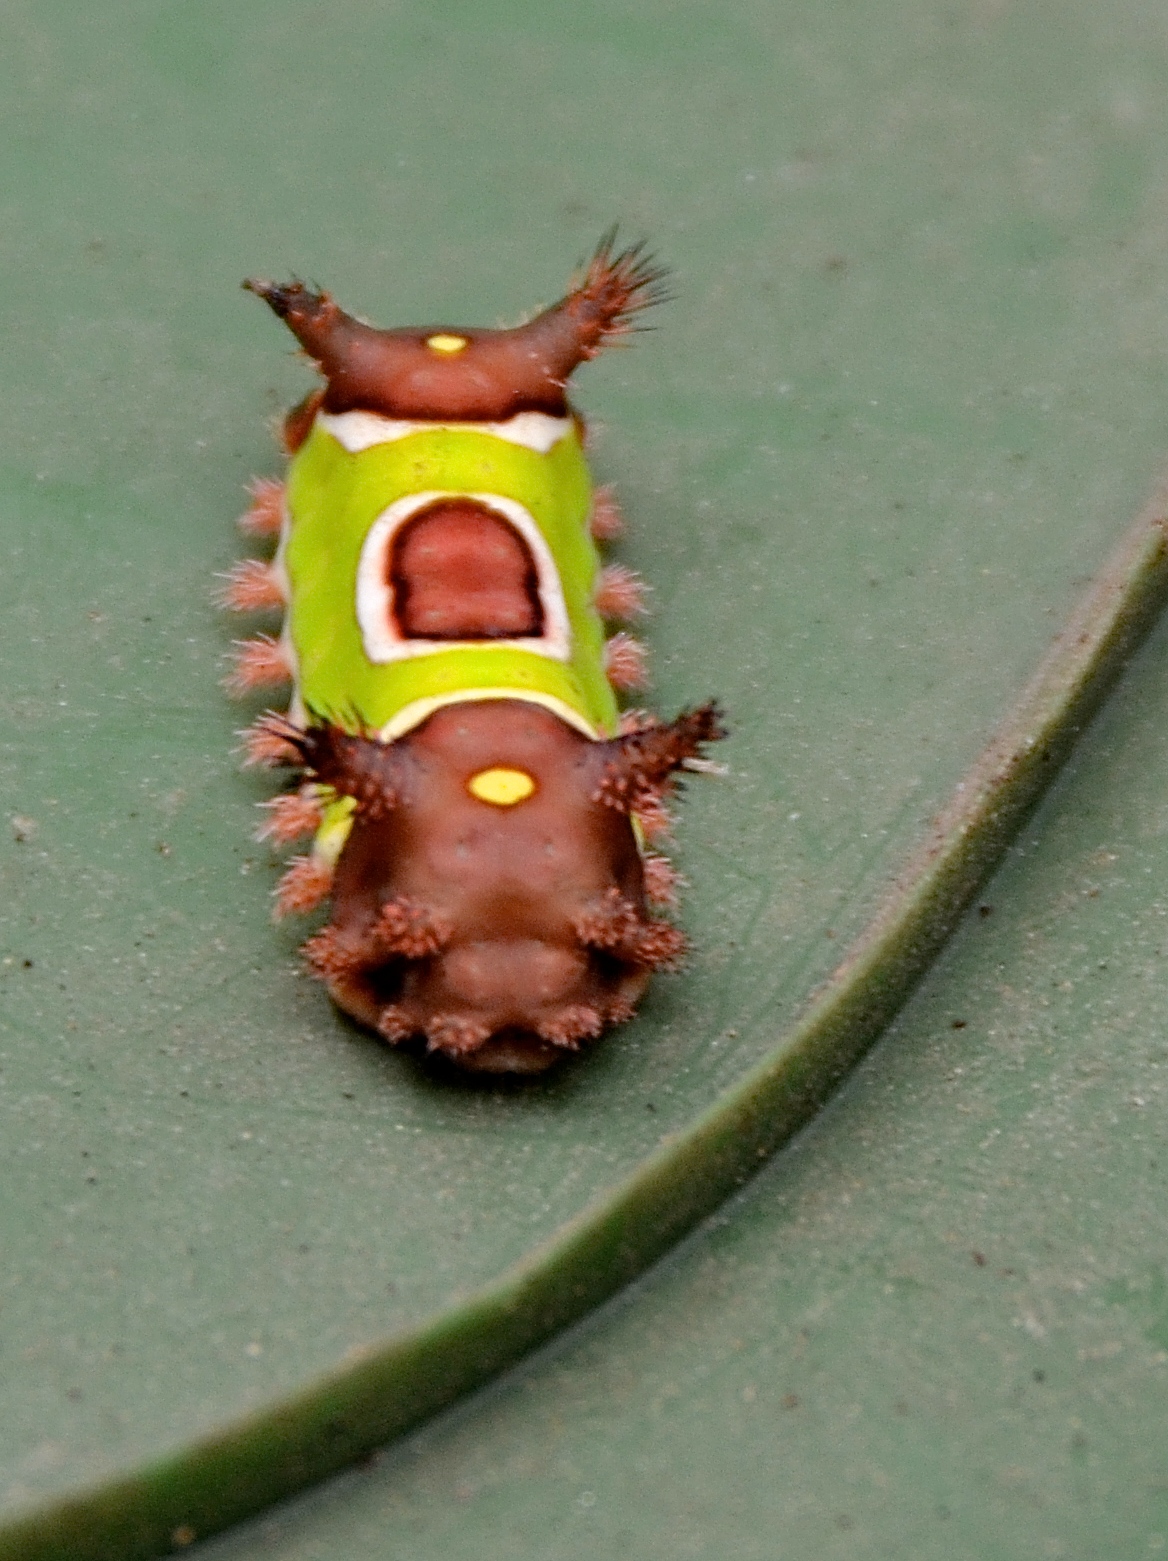 The front end of the Saddleback Slug Caterpillar does not look so alarming